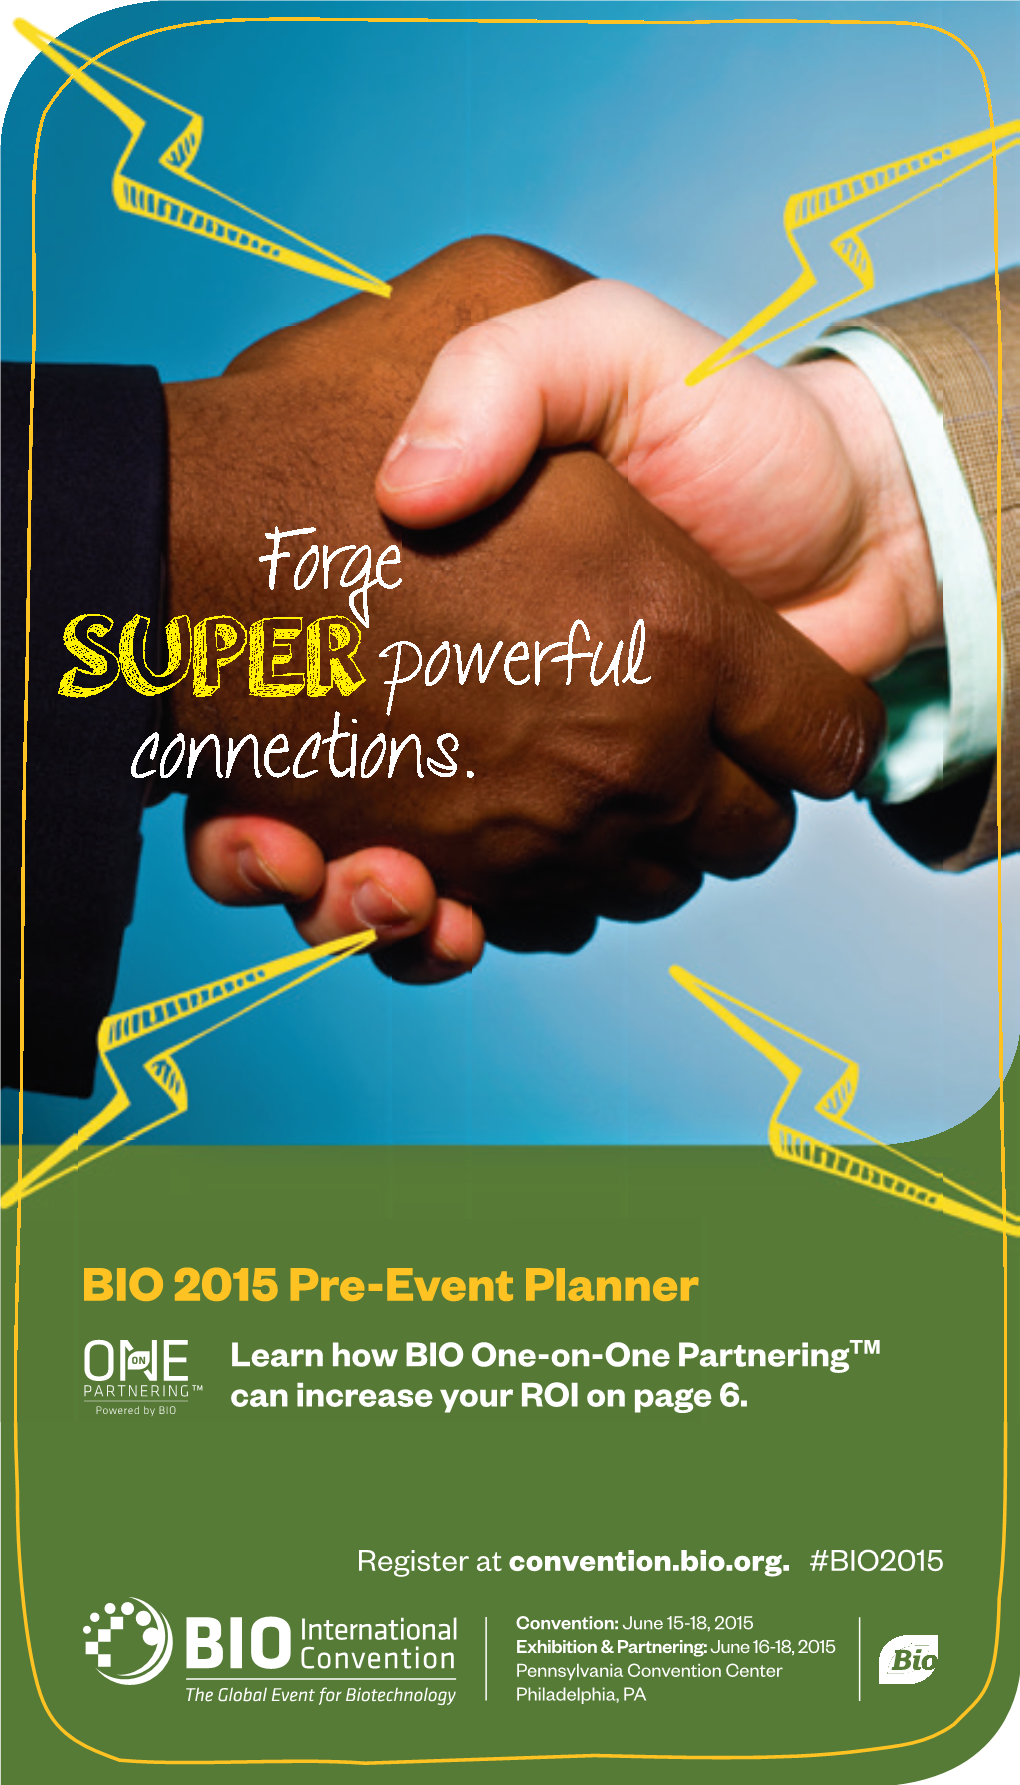 BIO 2015 Pre-Event Planner Learn How BIO One-On-One Partneringtm Can Increase Your ROI on Page 6